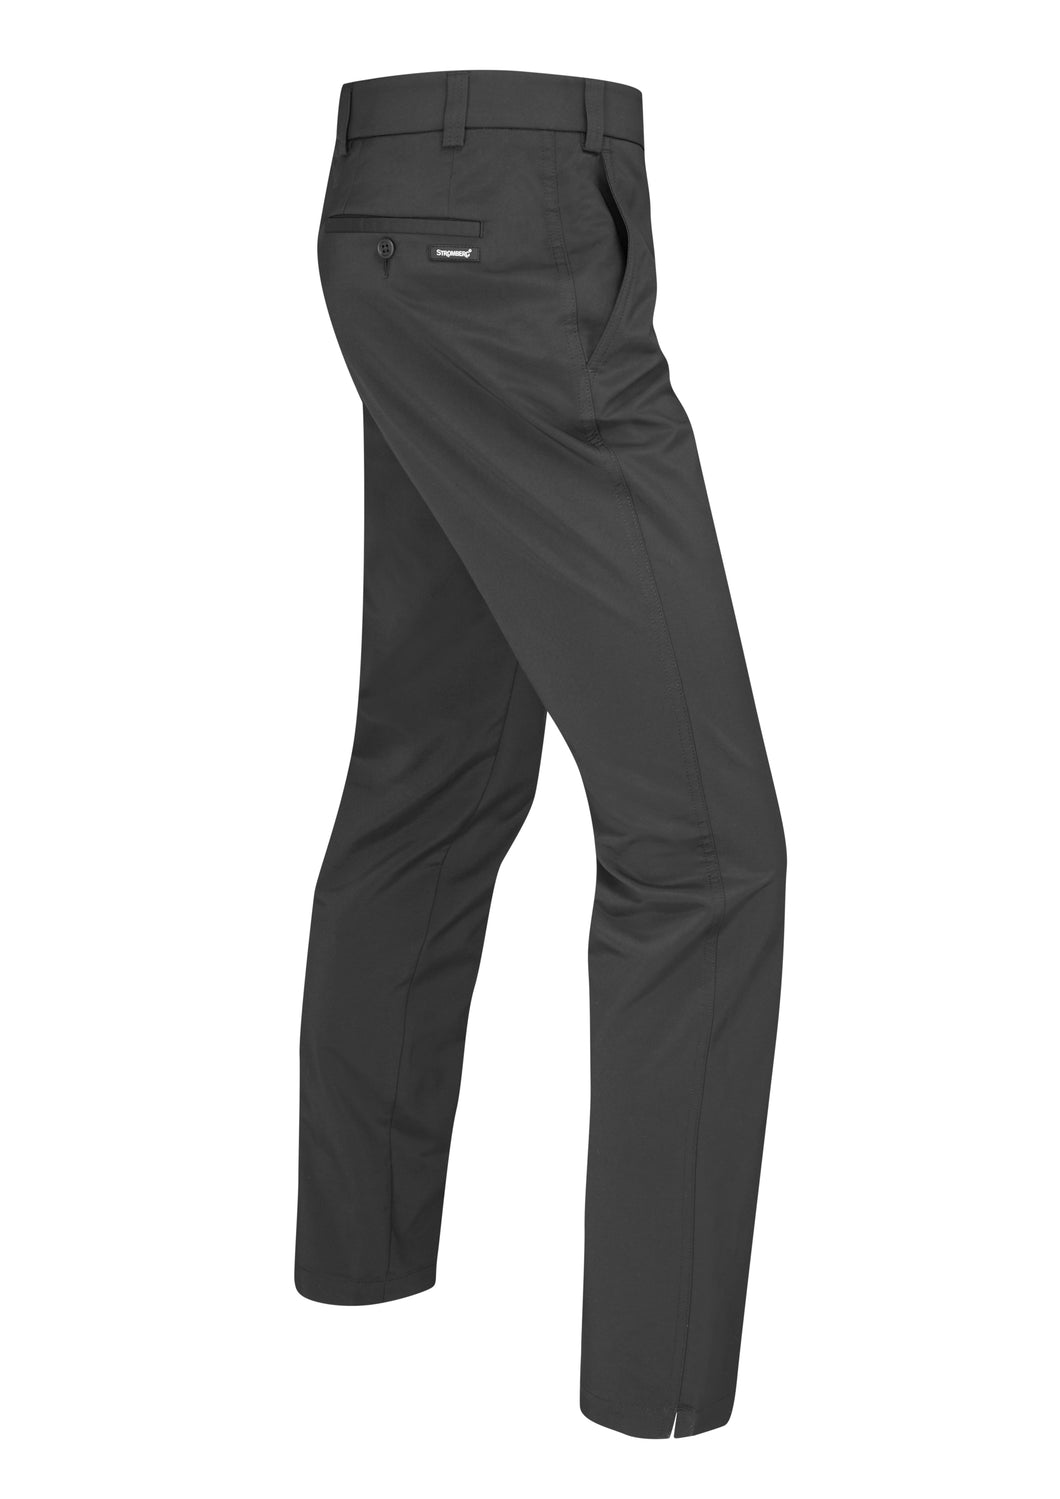 Hampton 1.0 - Black Technical Stretch Trouser - Tapered Fit